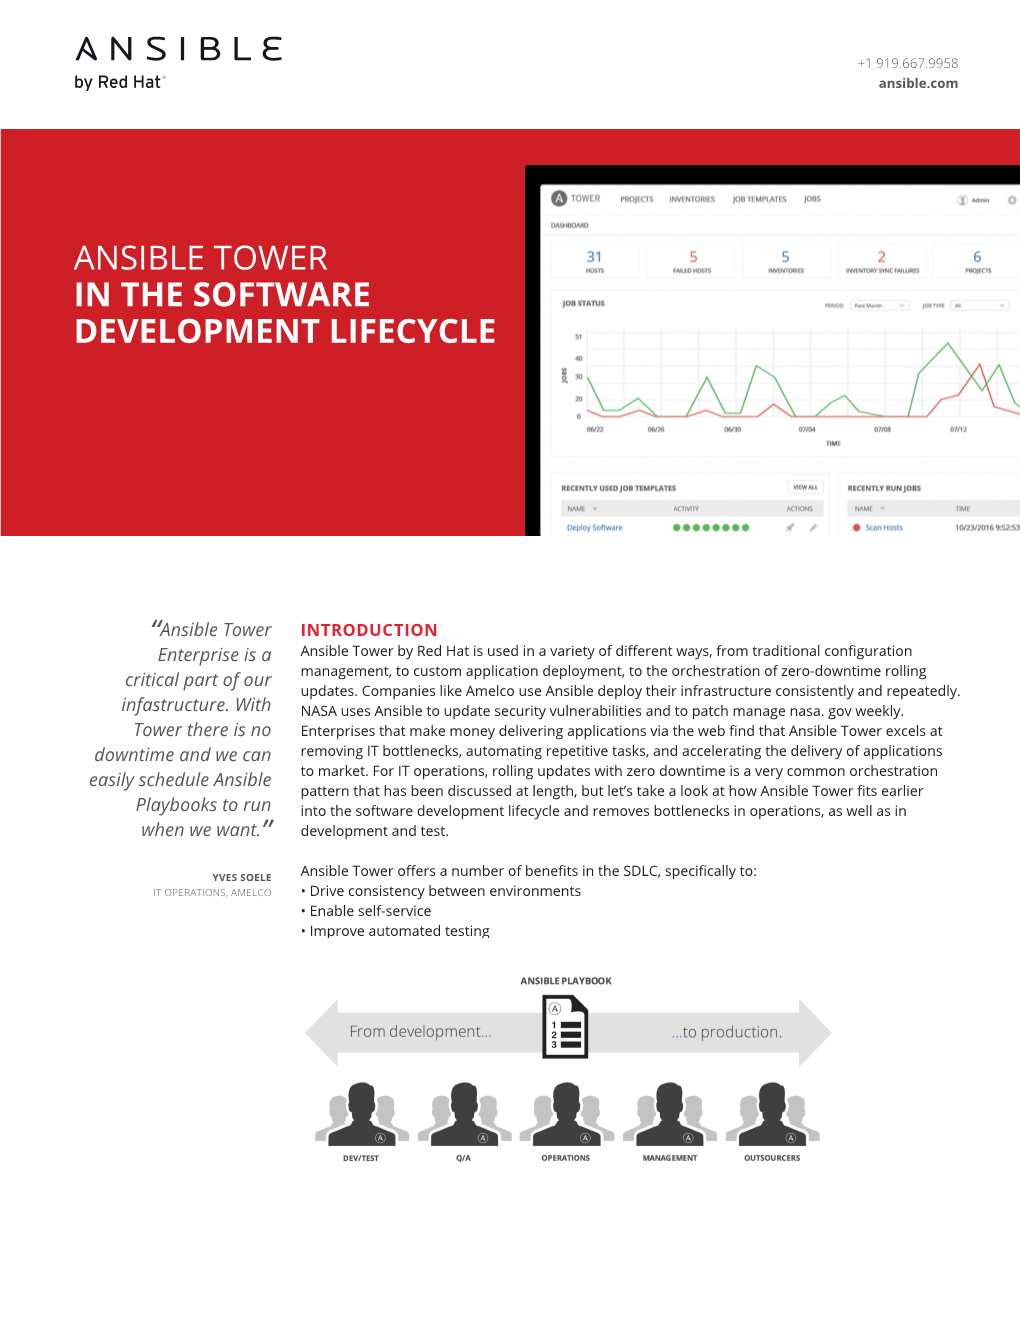 Ansible Tower in the Software Development Lifecycle